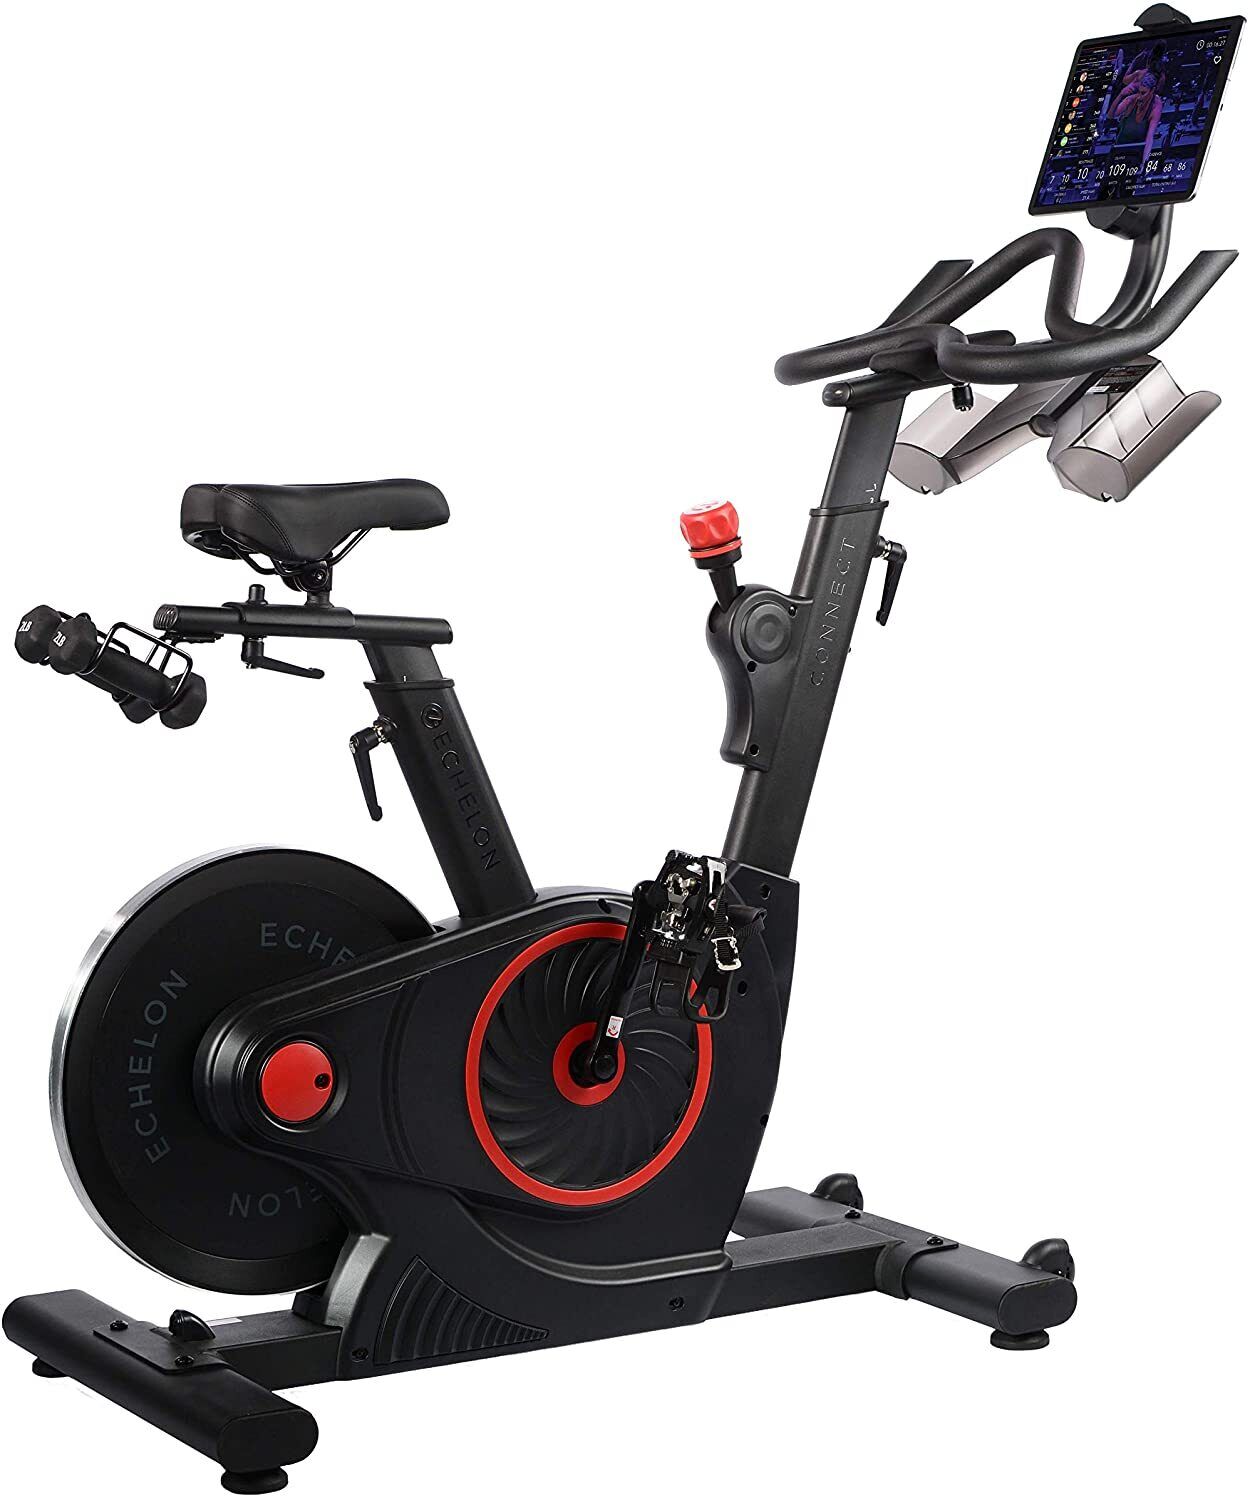 Echelon Smart Connect Fitness Exercise Bike Stationary Bicycle Cardio EX5